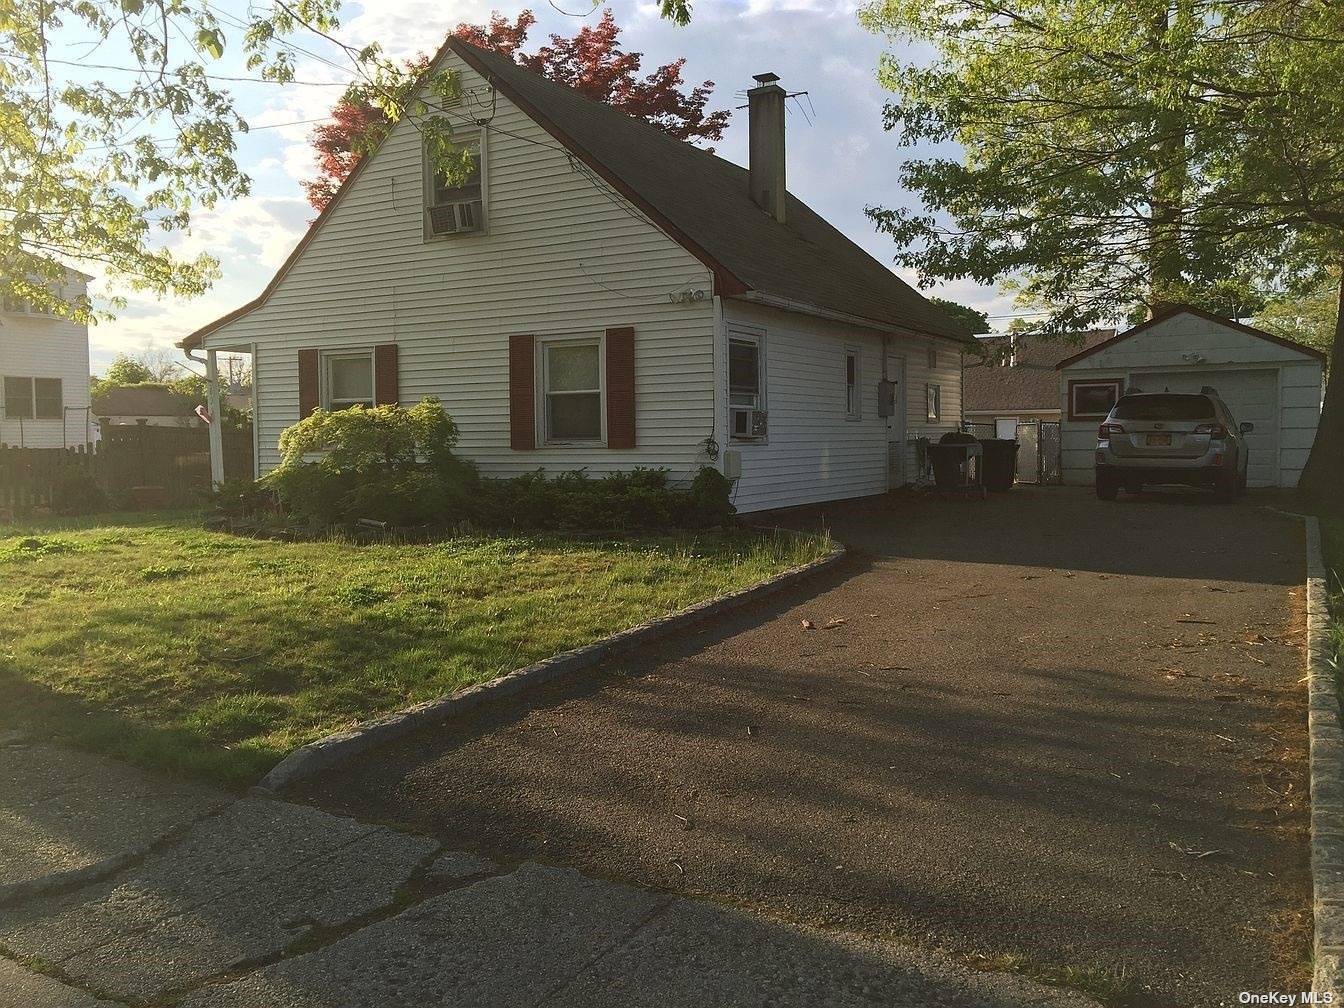 Great opportunity to acquire a well maintained house in West Hempstead.